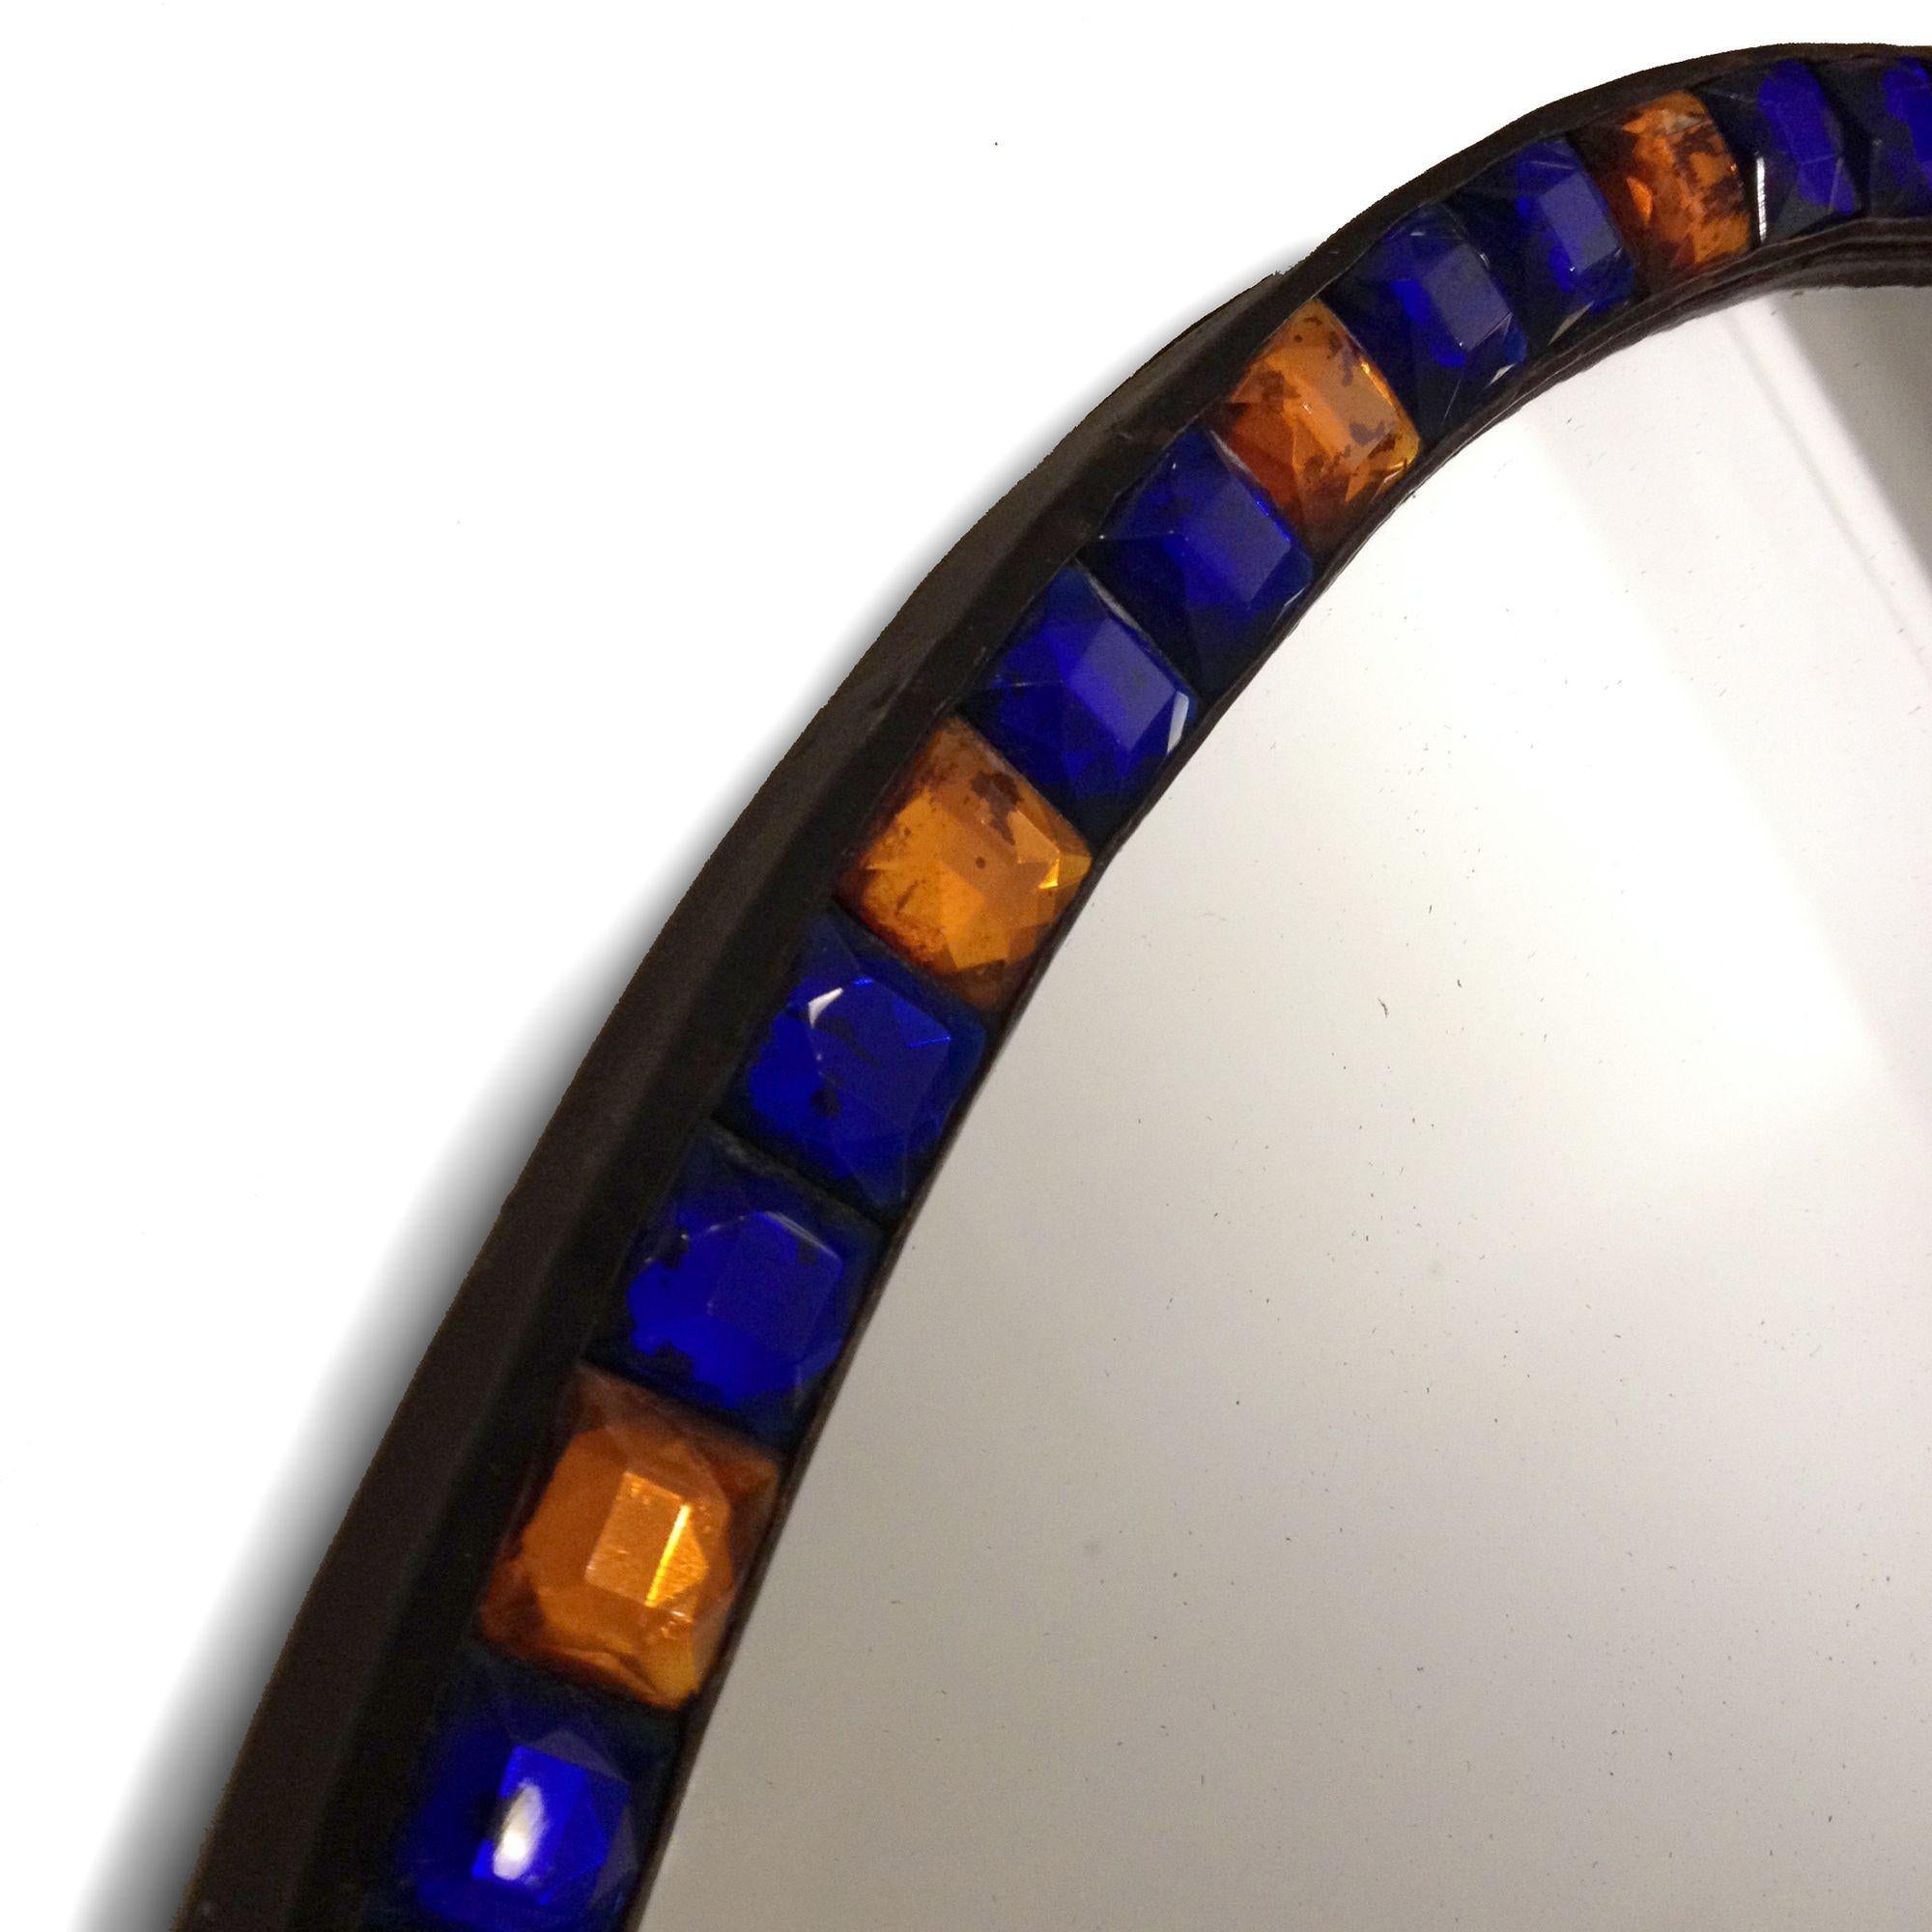 The alternating blue and amber faceted glass gems set into a metal oval frame.

